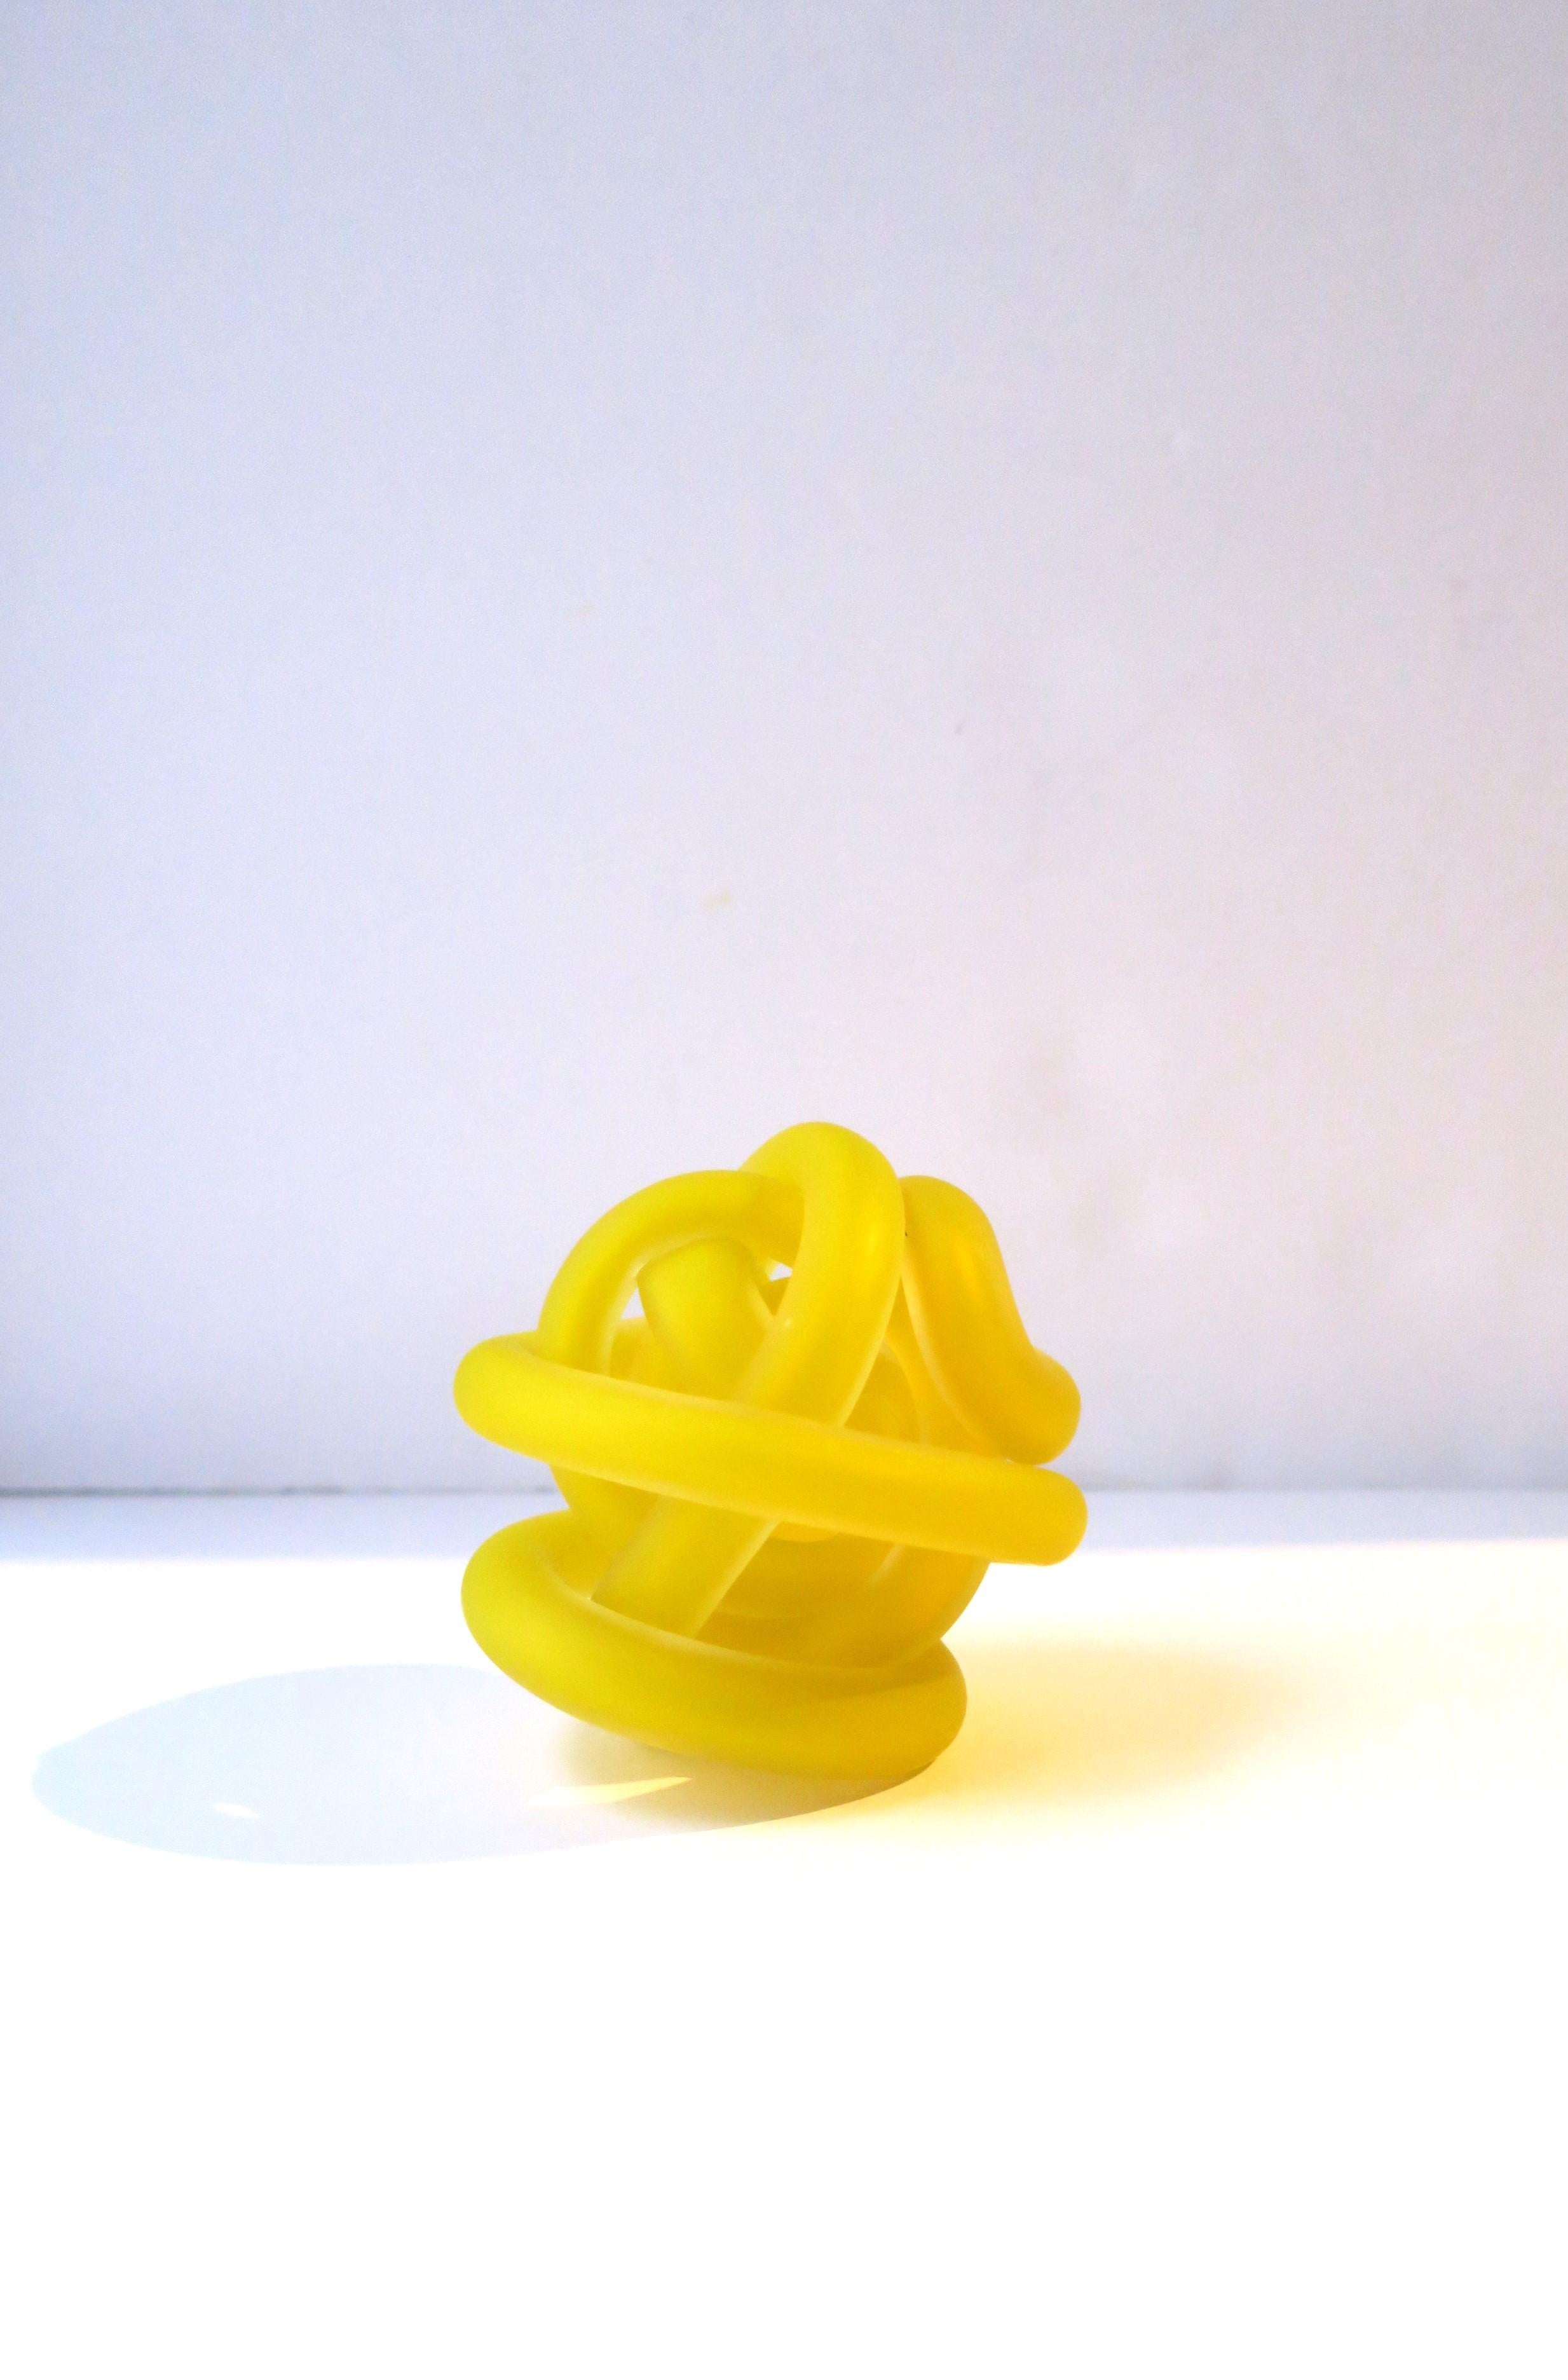 A yellow art glass knot sculpture decorative object, circa early 21st century. A beautiful pop of color with this contemporary art glass sculpture decorative object piece. A great item for a desk, bookshelf, cocktail table, on top of books, etc.